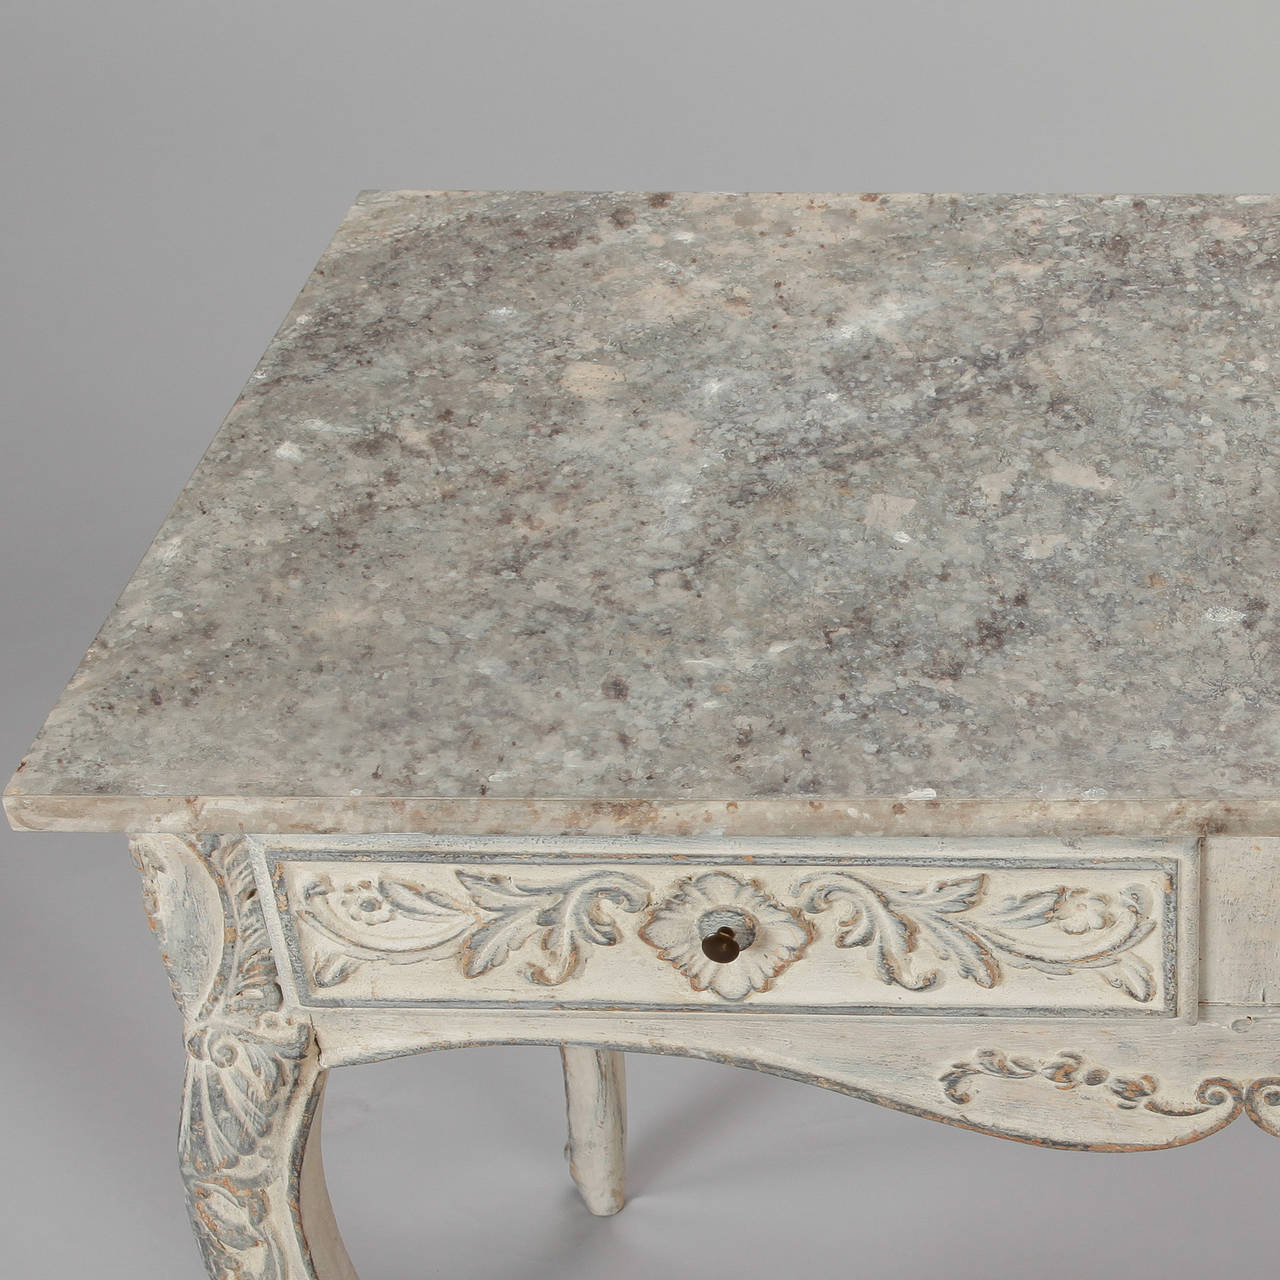 Circa 1900 French painted table with two narrow drawers, curved apron, cabriole legs and decorative details of carved flowers and leaves. Versatile size - use it as a console, ladies writing desk or side table.